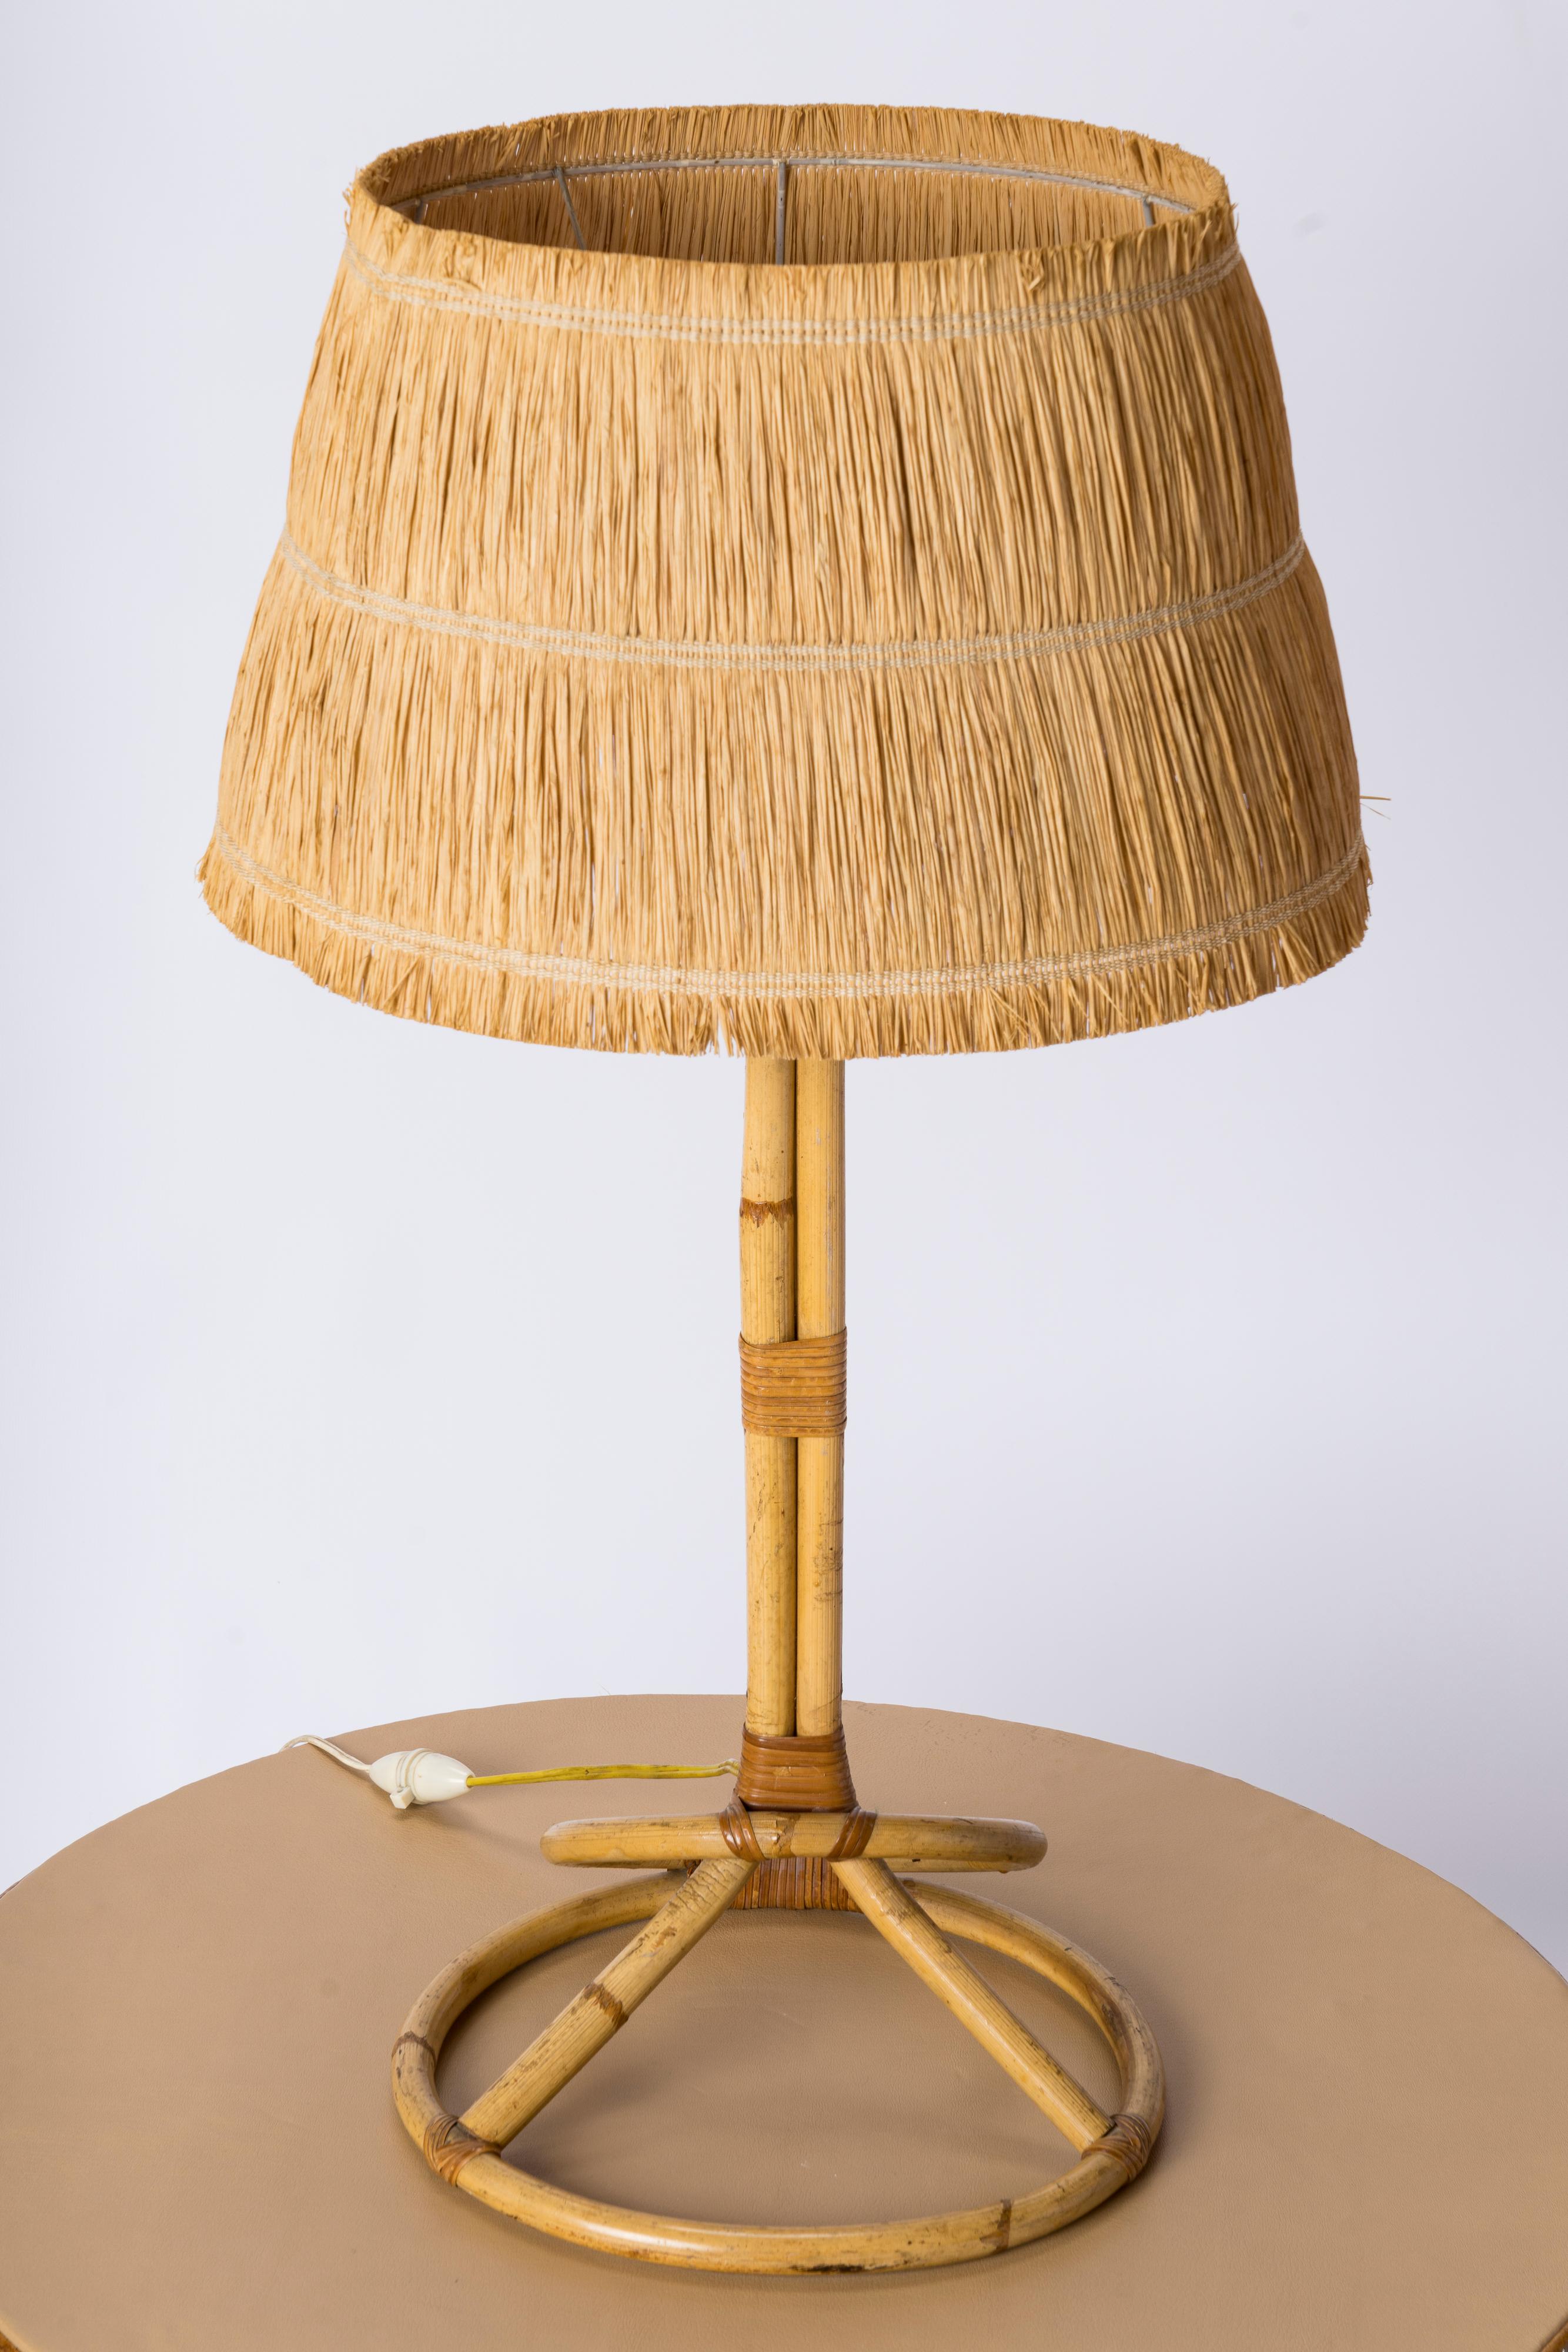 Tall Rattan Table Lamp w. Raffia Shade - France 1950's For Sale 2